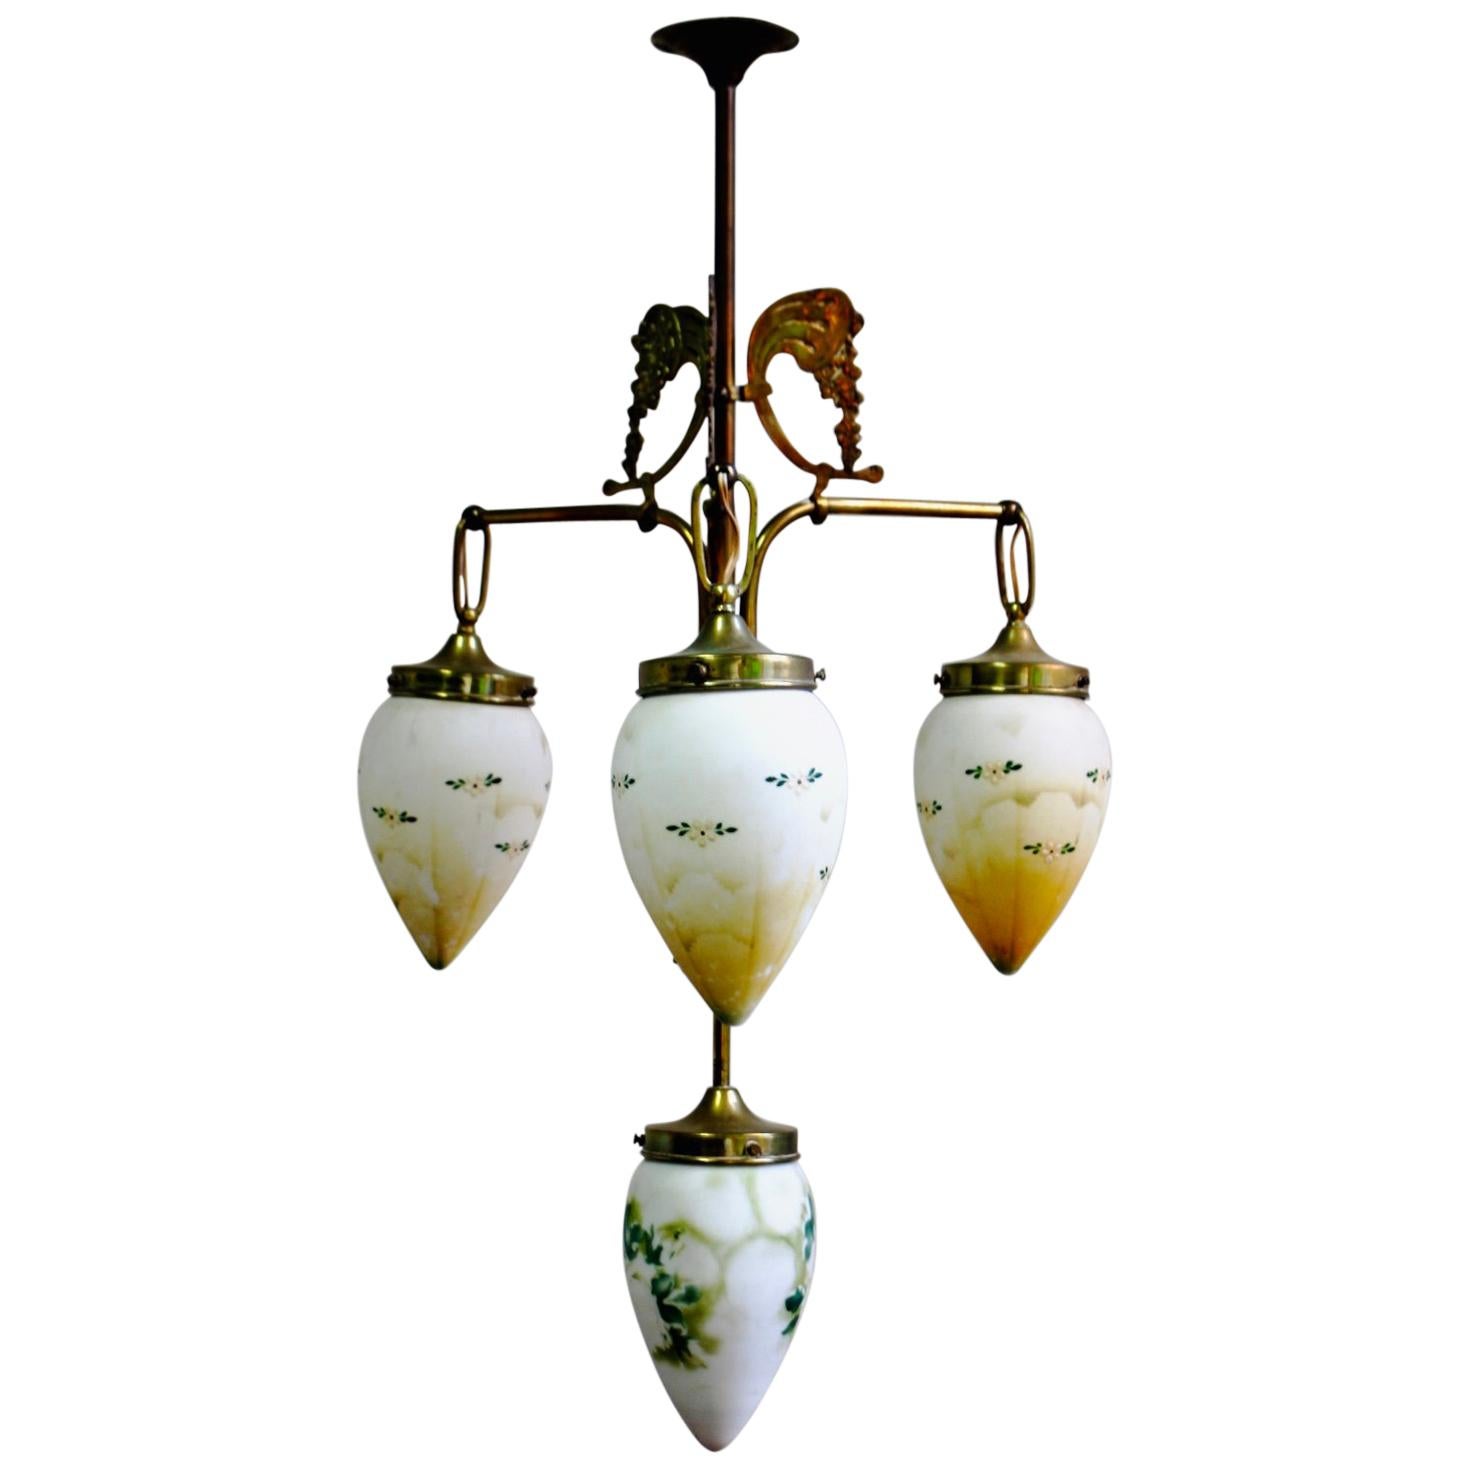 Antique Art Nouveau Brass Chandelier with Hand Painted Glass Shades For Sale